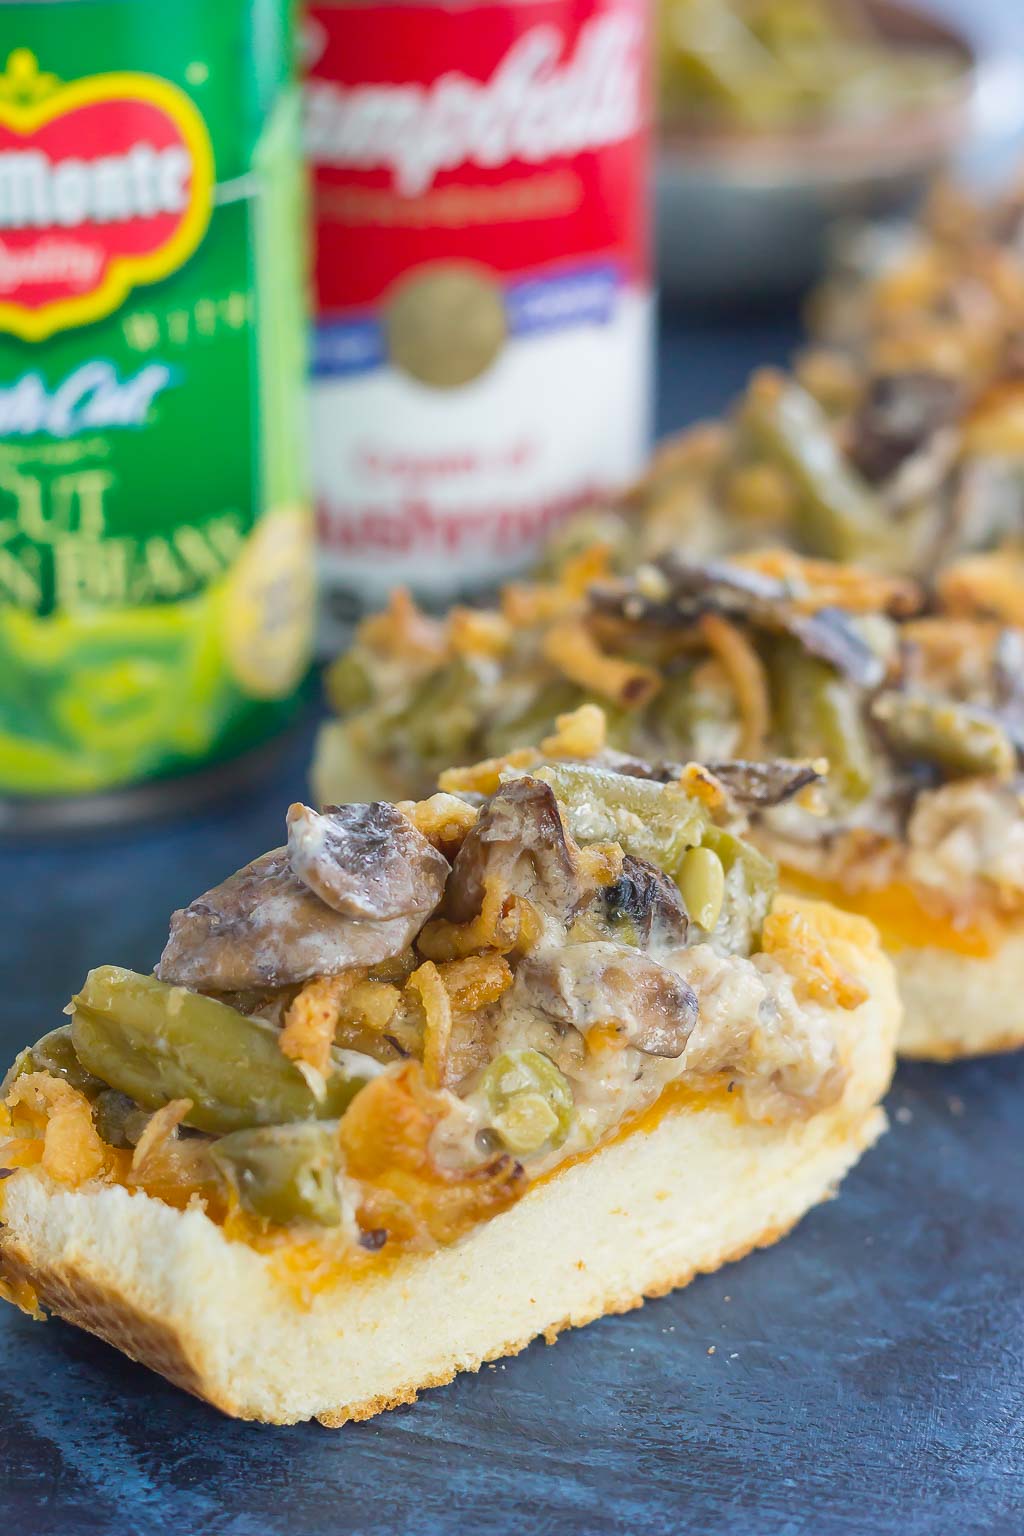 This Green Bean Casserole Cheesy Bread puts a creative spin on the classic holiday side dish. The zesty casserole is made in just one pan, piled on top of toasted cheesy bread, and then baked until warm and bubbly. This simple dish is fast, fresh, flavorful and will become the hit of the dinner table!